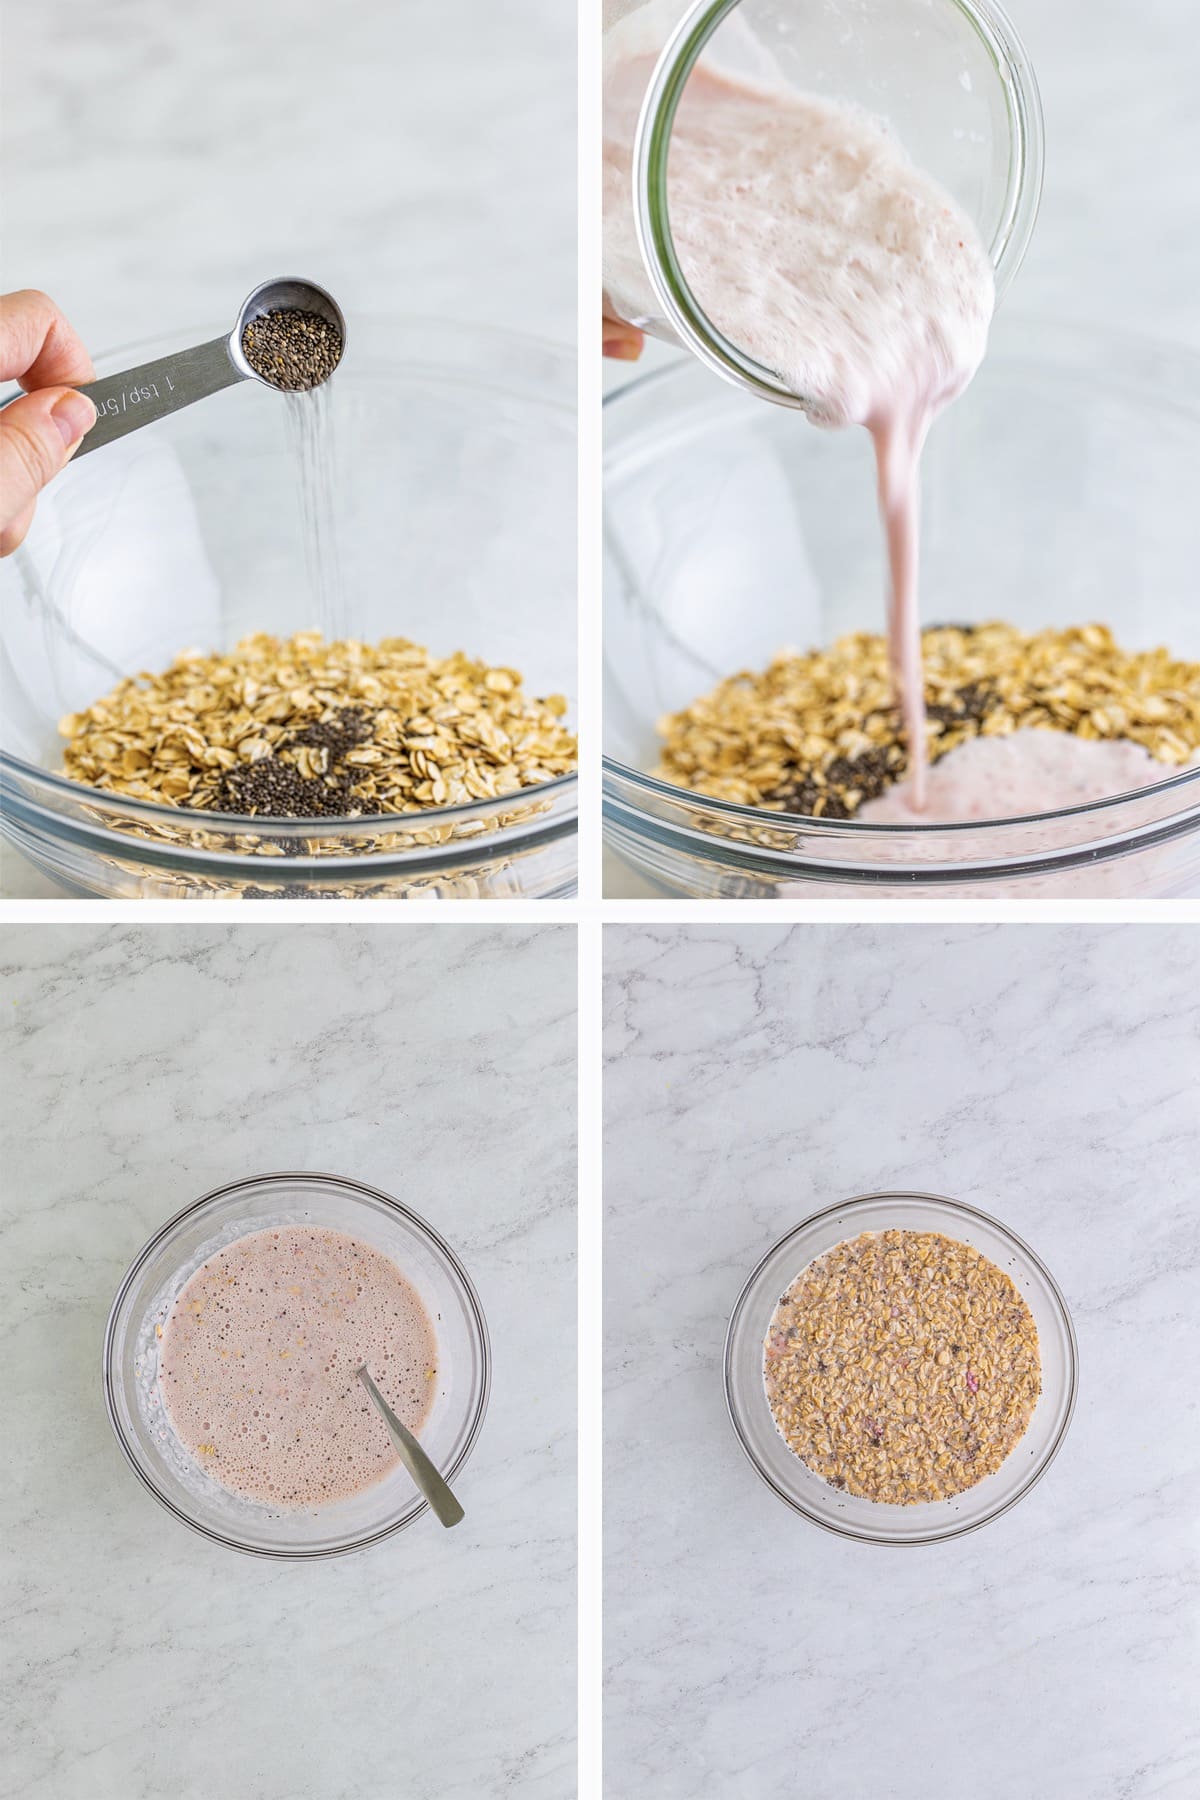 Collage of images showing how to make strawberry overnight oats